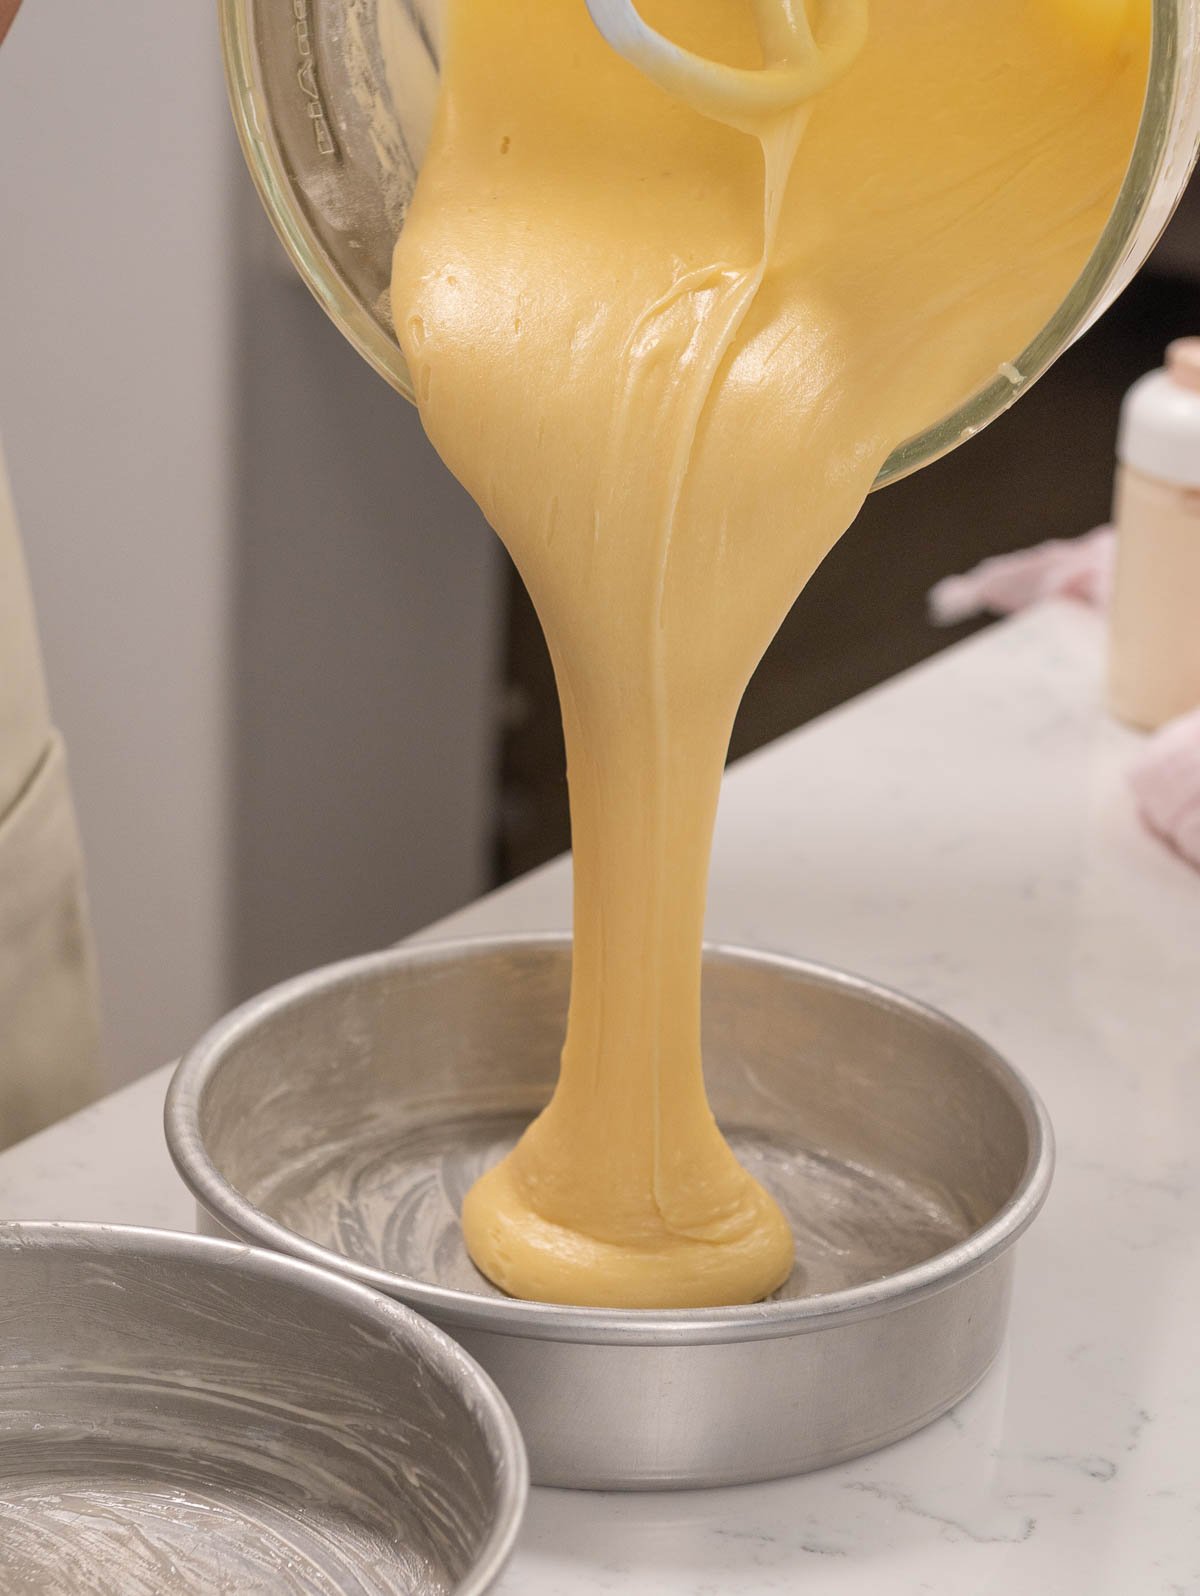 pouring cake batter into the cake pan